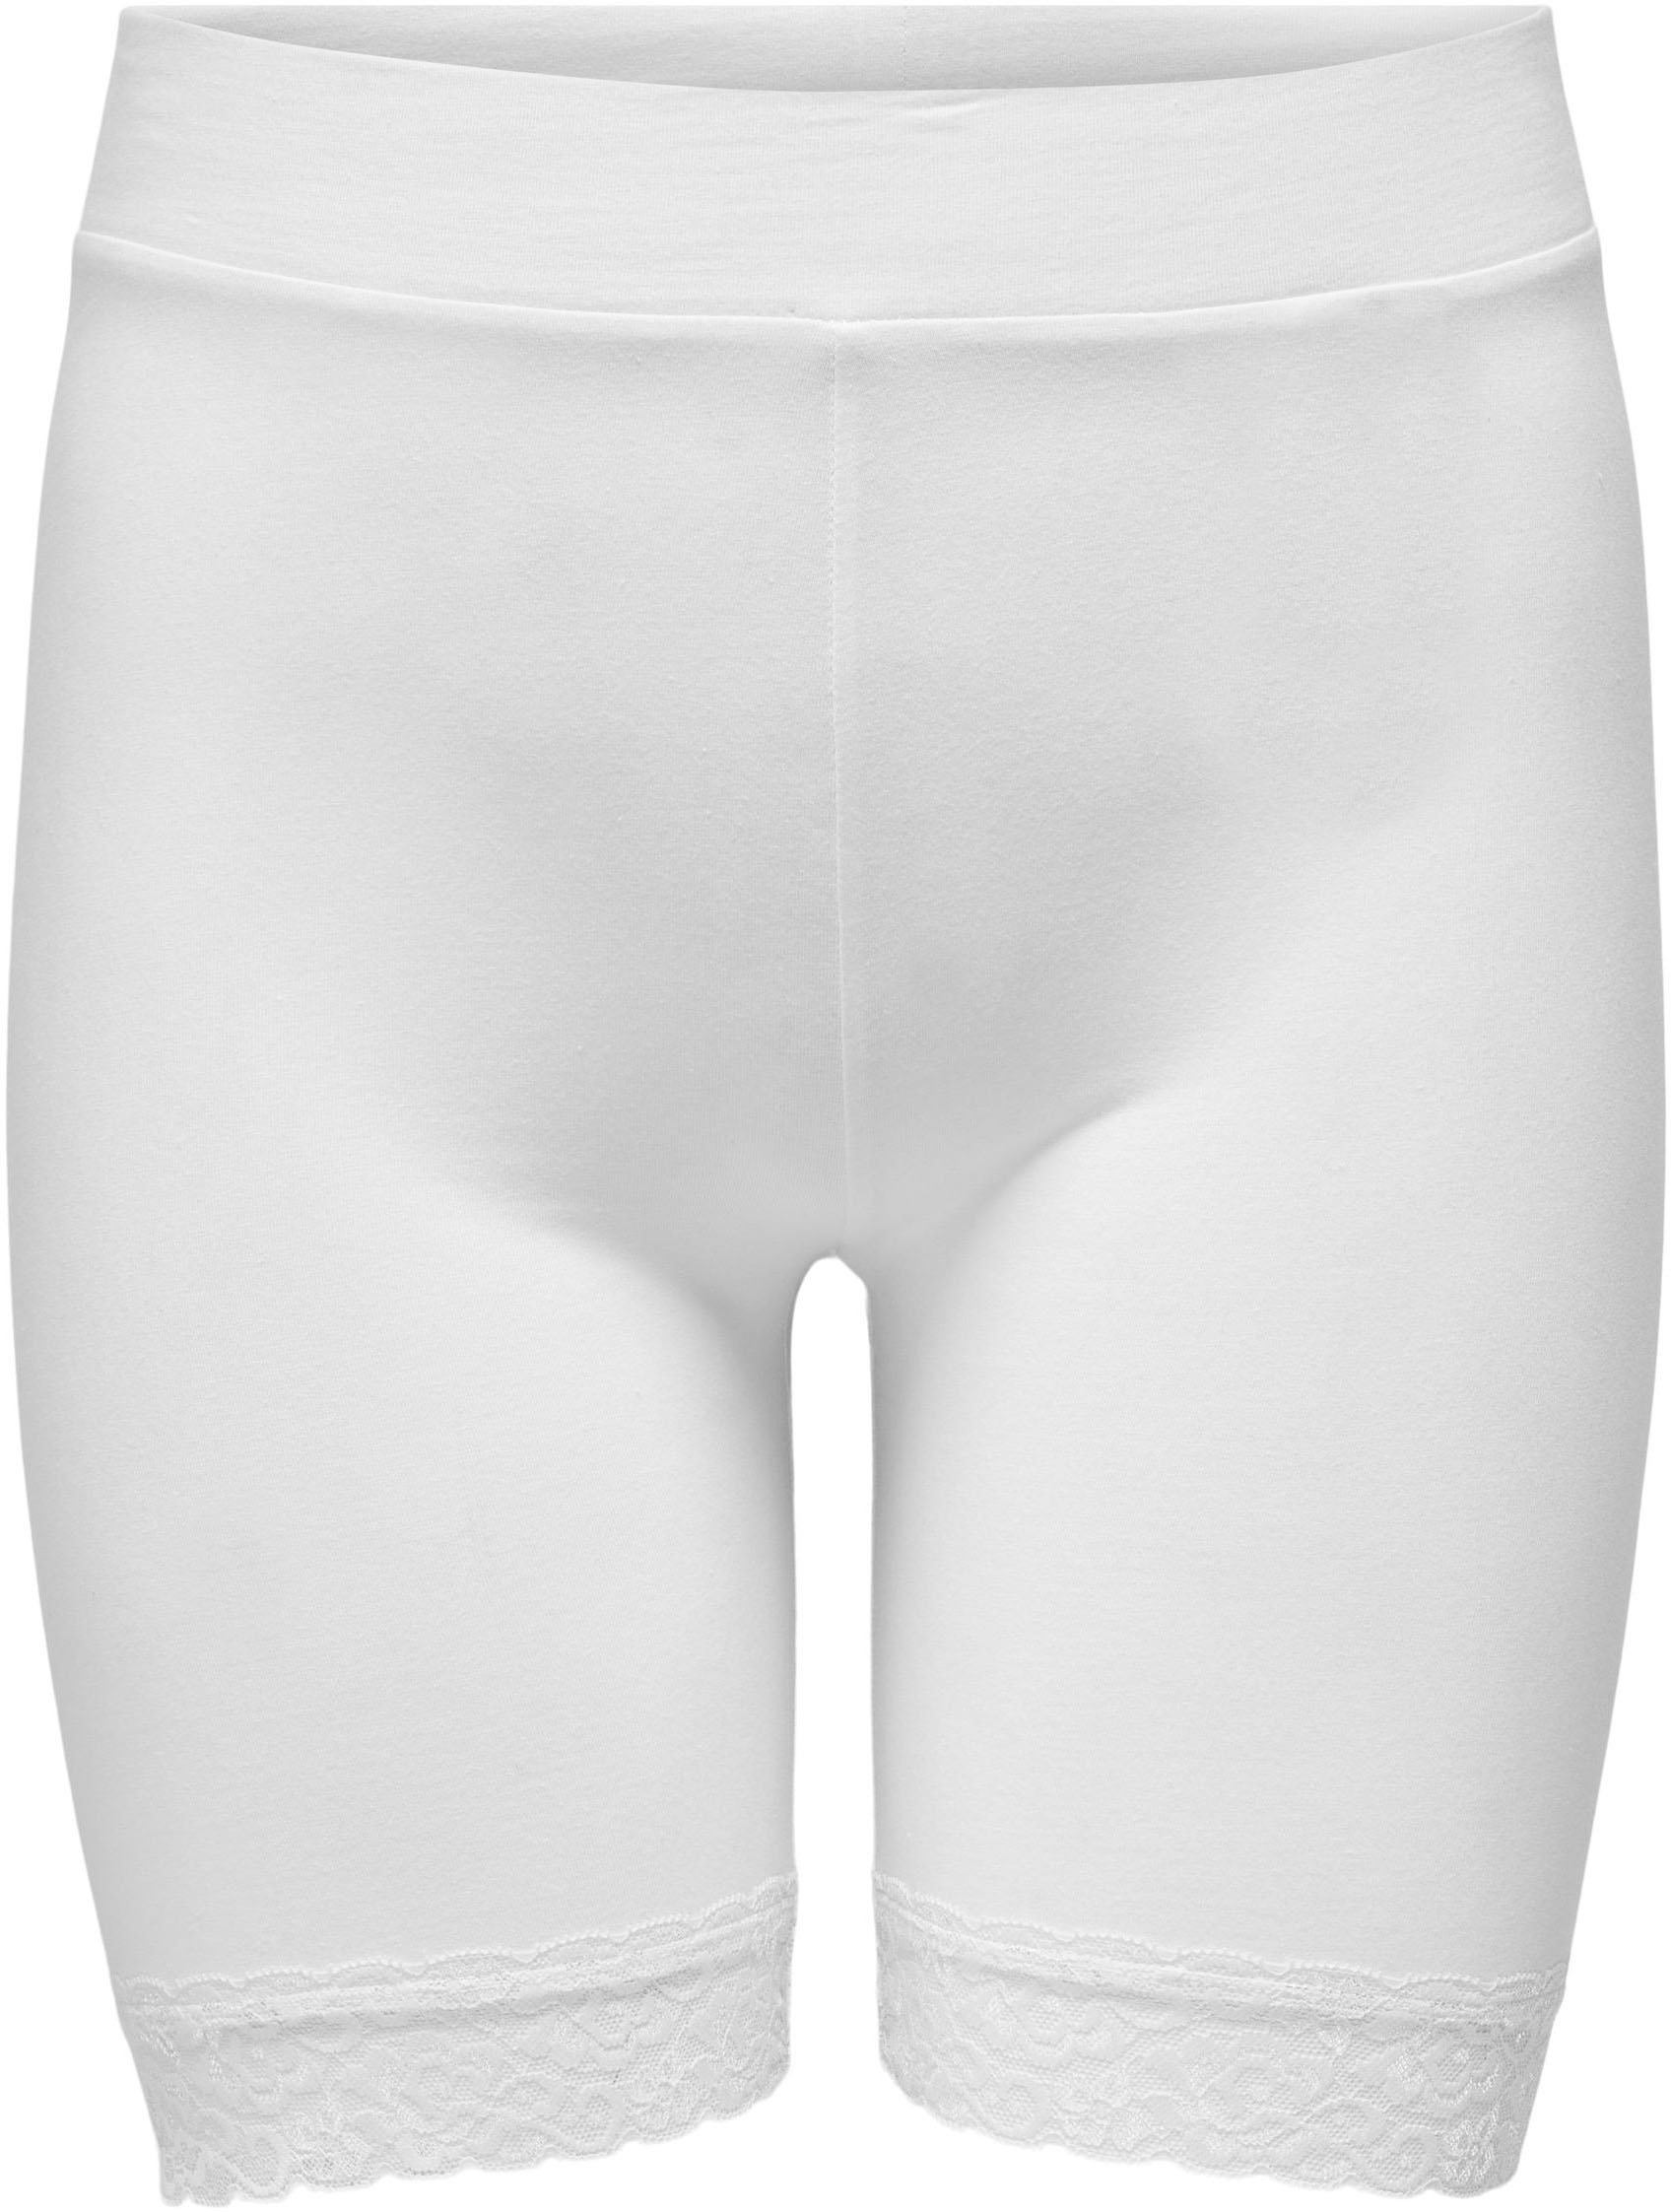 NOOS« SHORTS Radlerhose WITH bei LIFE LIFE CARMAKOMA LACE ♕ »CARTIME ONLY